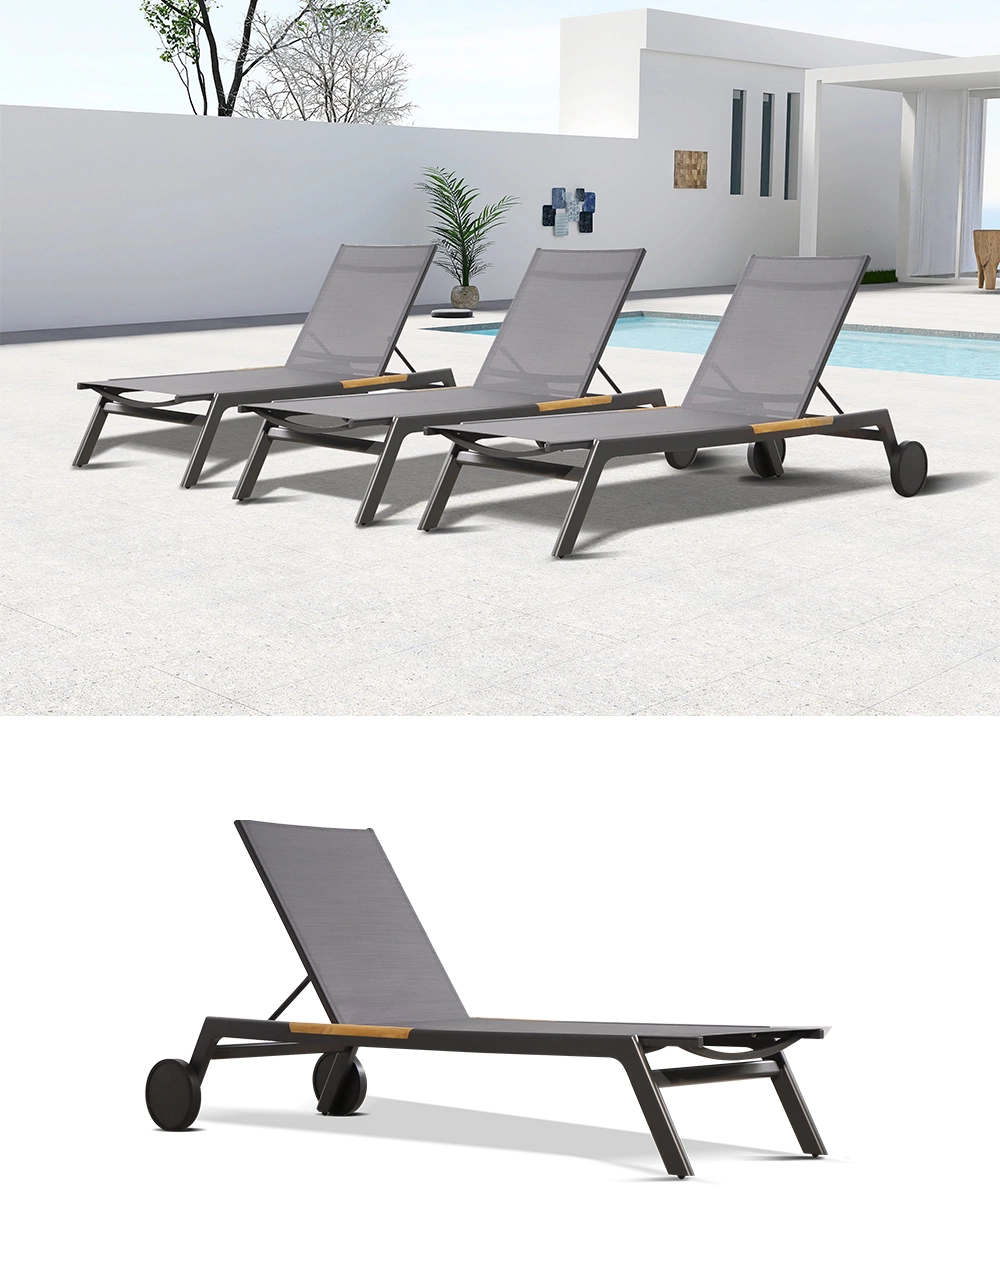 Courtyard Leisure Luxury Patio Beach Bed Aluminum Outdoor Furniture Sunbed Garden Daybed Sun Lounger Chaise Lounger